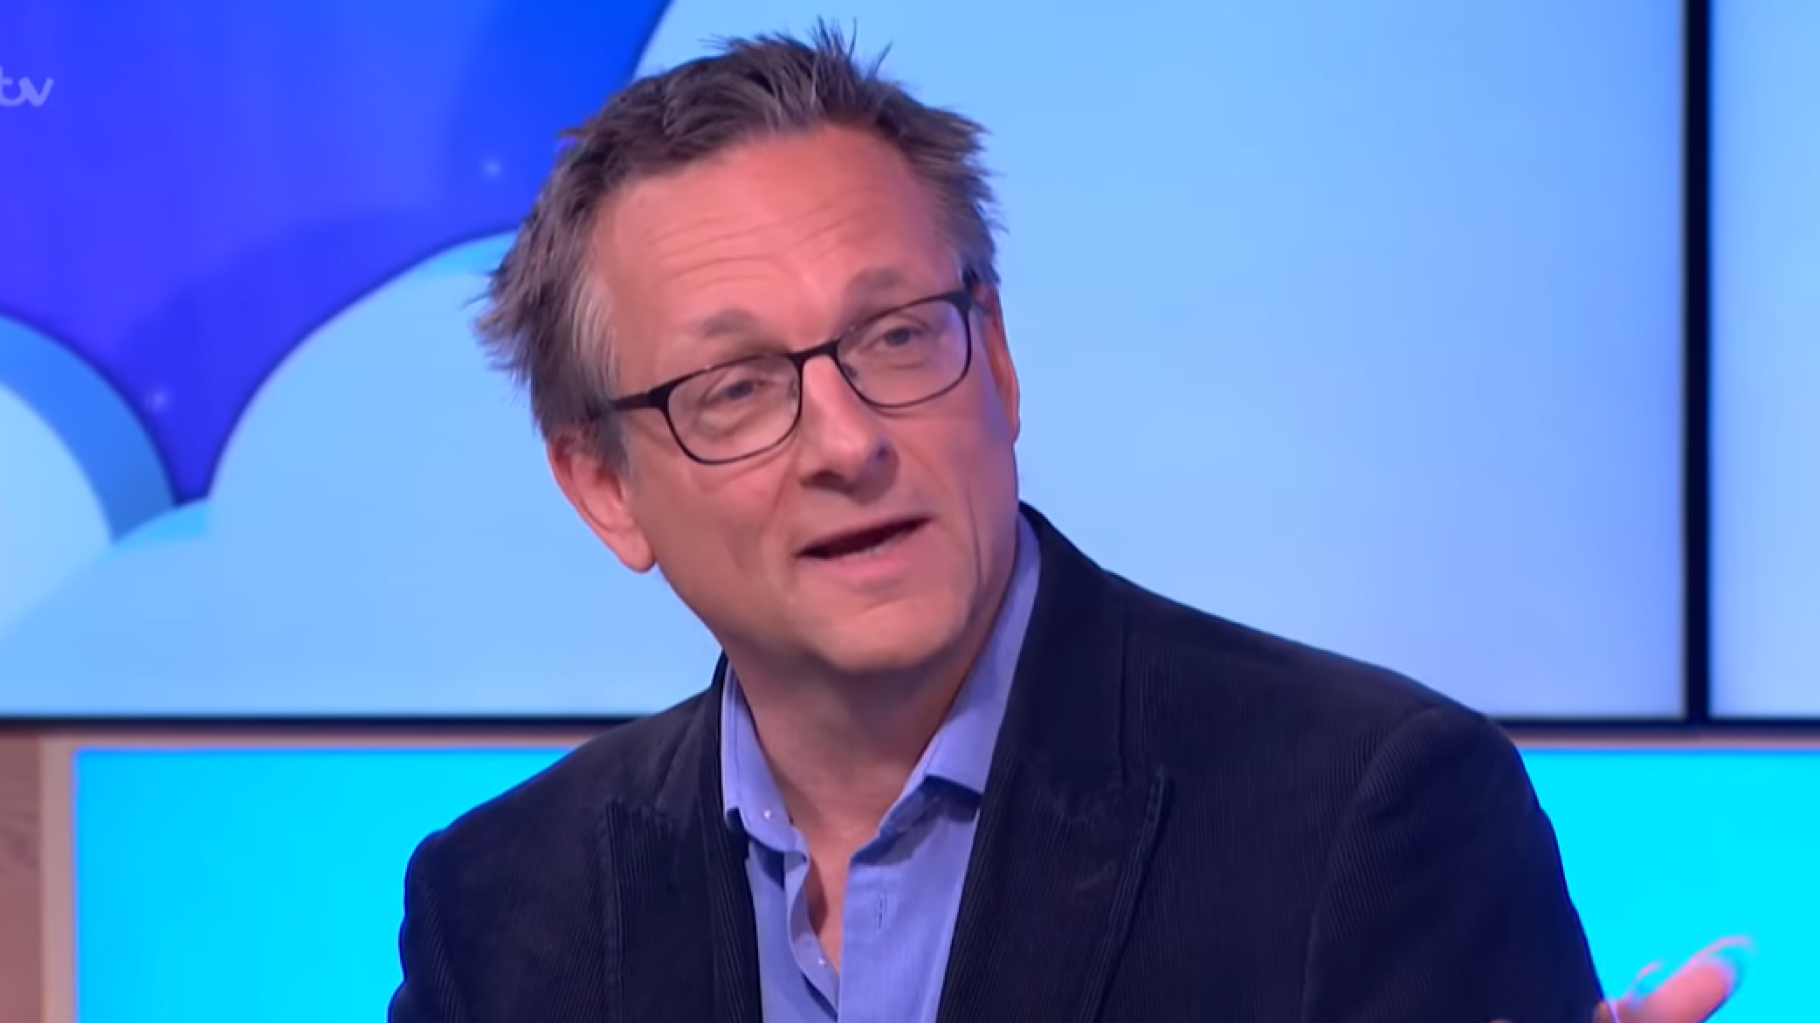 Michael Mosley, the British TV star doctor who disappeared in Greece on Thursday, has died